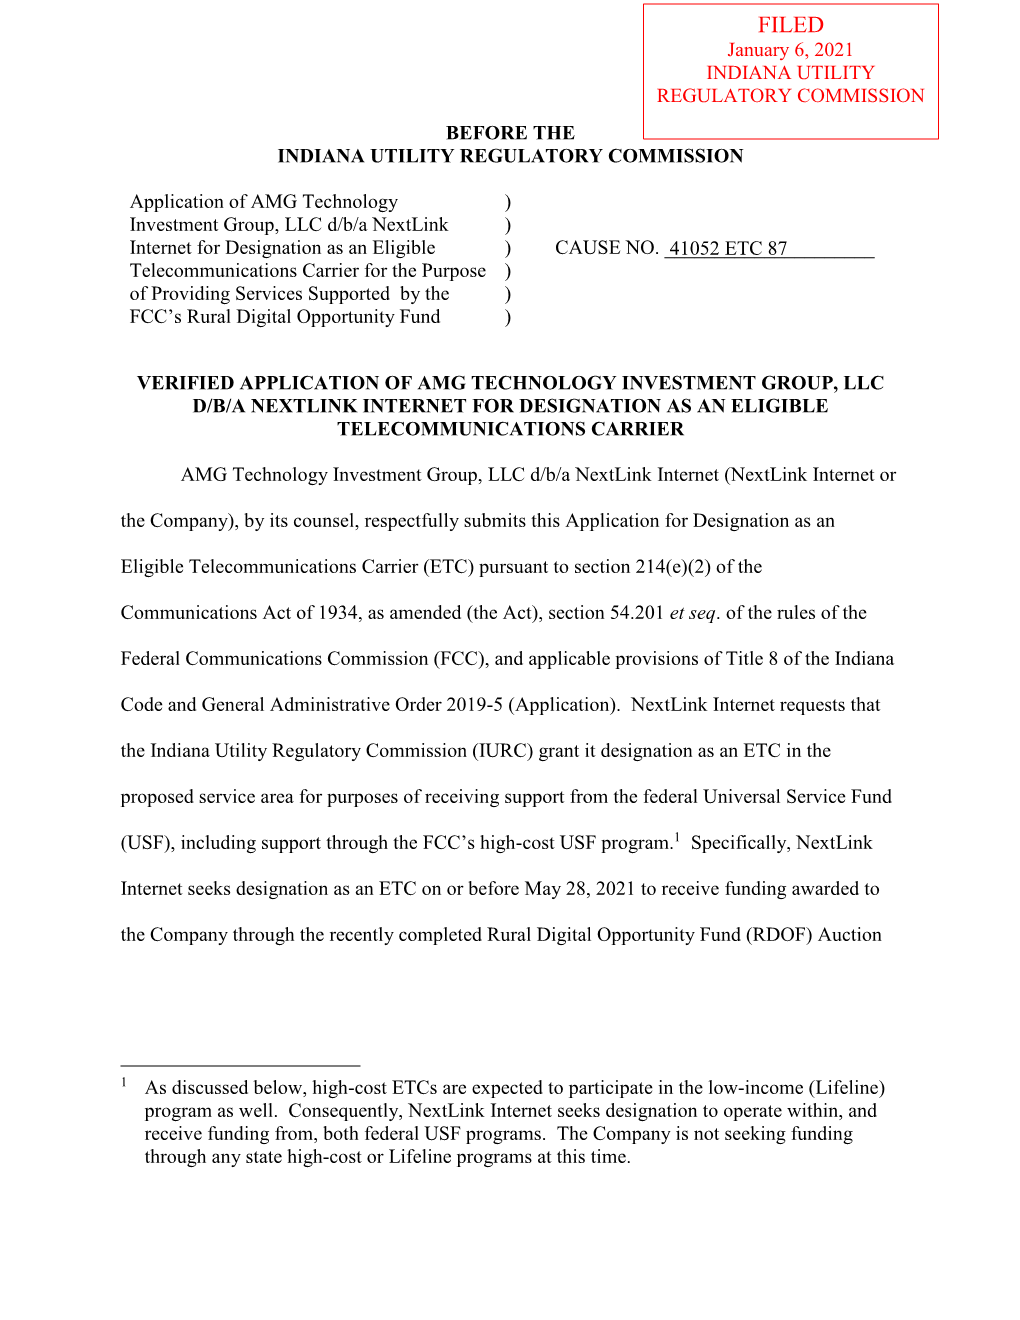 BEFORE the INDIANA UTILITY REGULATORY COMMISSION Application of AMG Technology Investment Group, LLC D/B/A Nextlink Internet